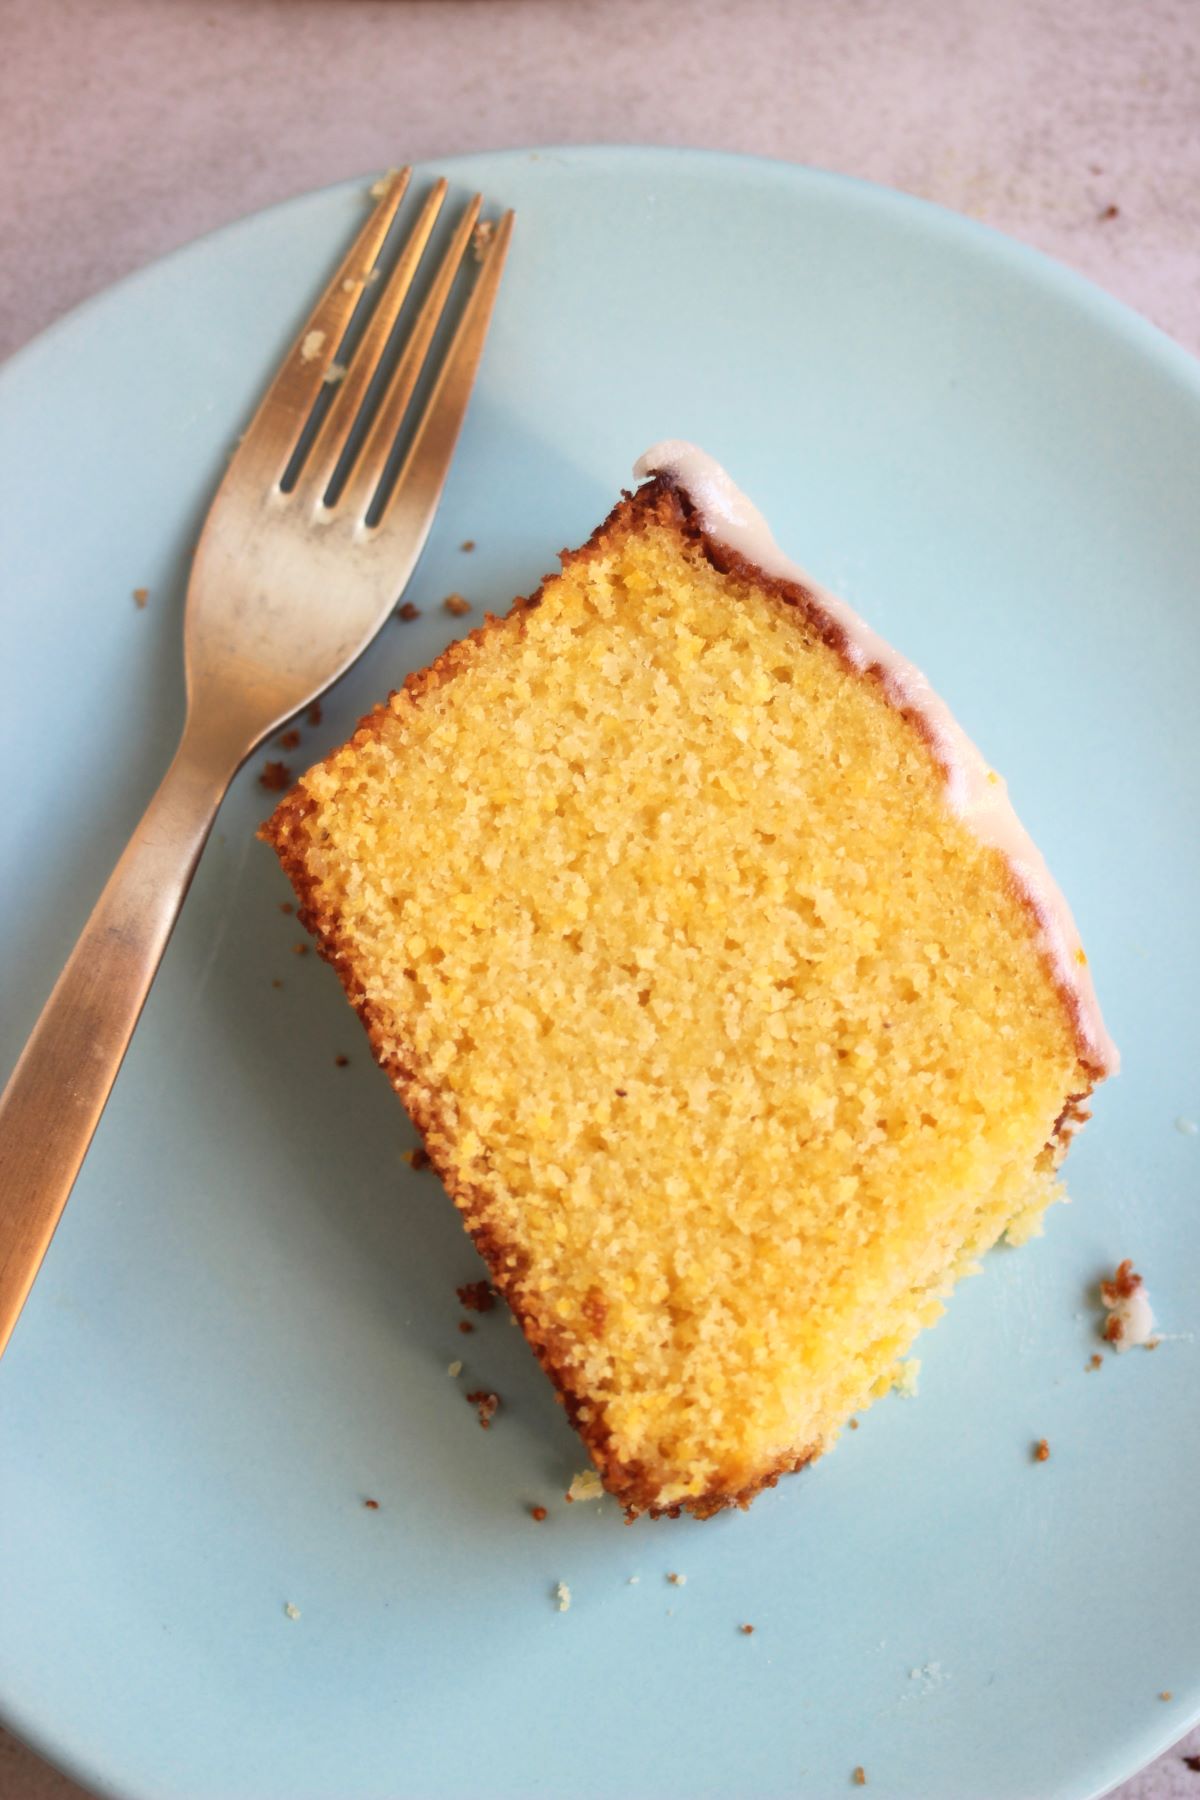 A slice of orange cake with icing on a light blue plate and a golden fork.